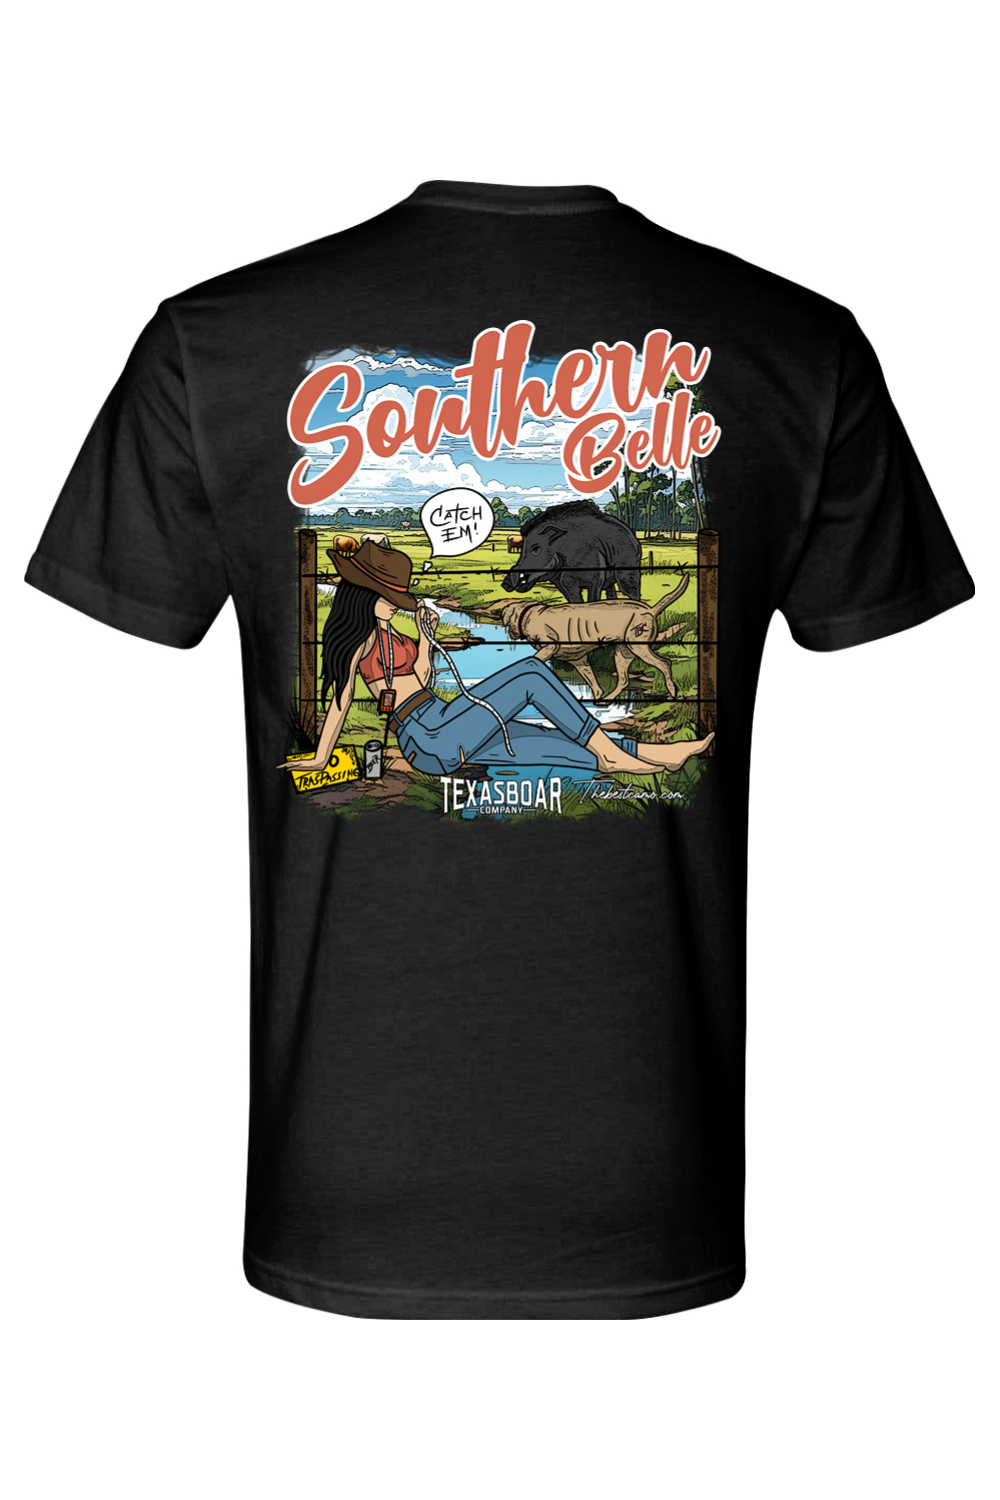 southern belle unisex size